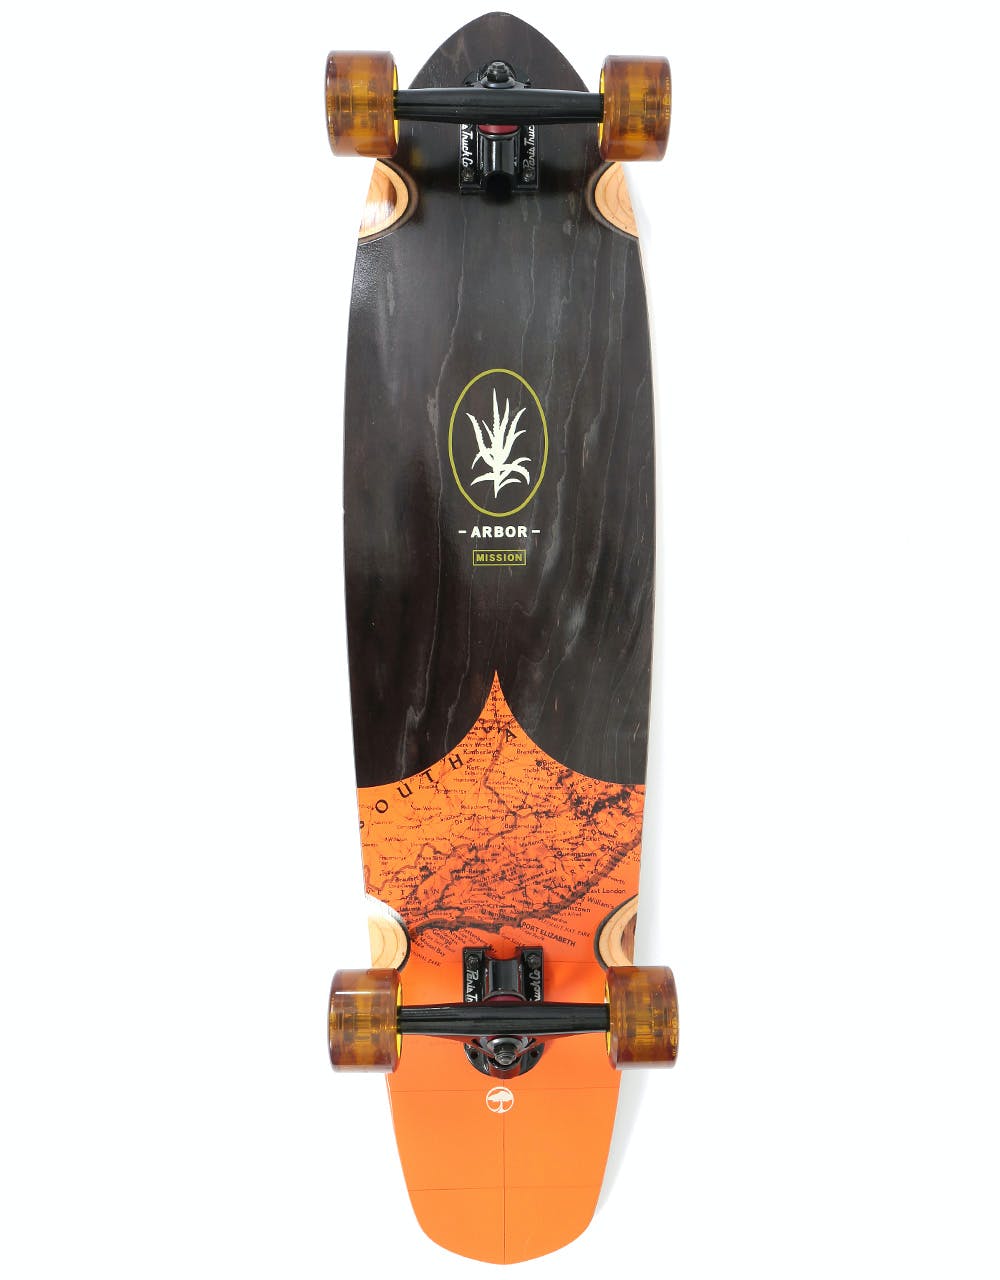 Arbor Mission Groundswell Longboard - 35" x 8.375"